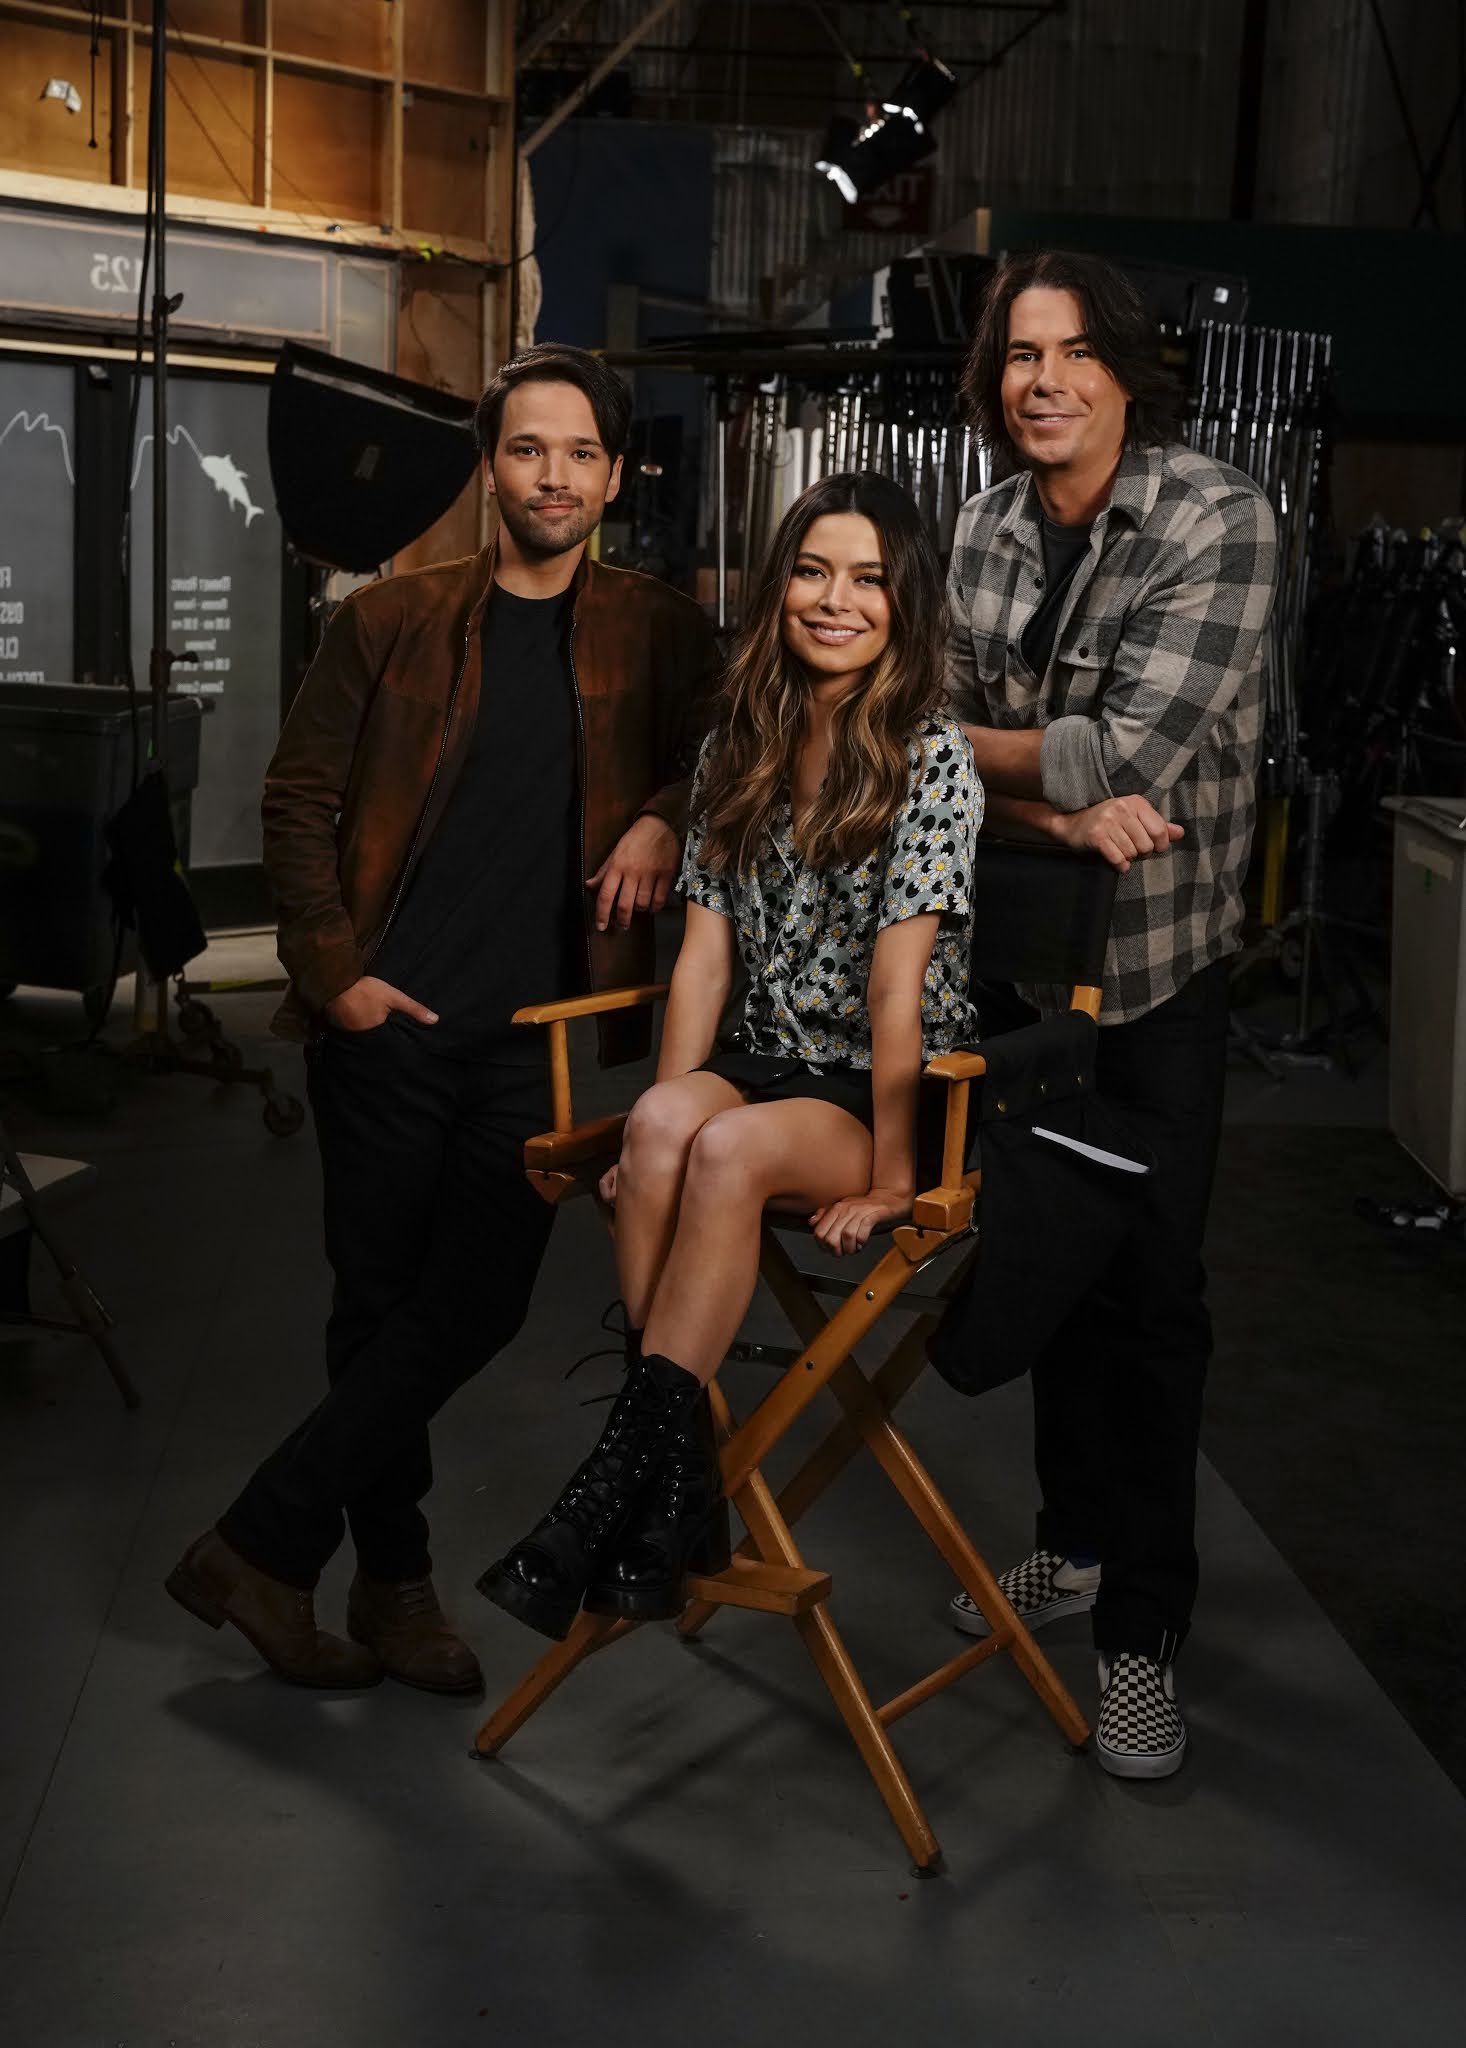 NickALive!: Paramount Plus to Debut New 'iCarly' Series in June 2021